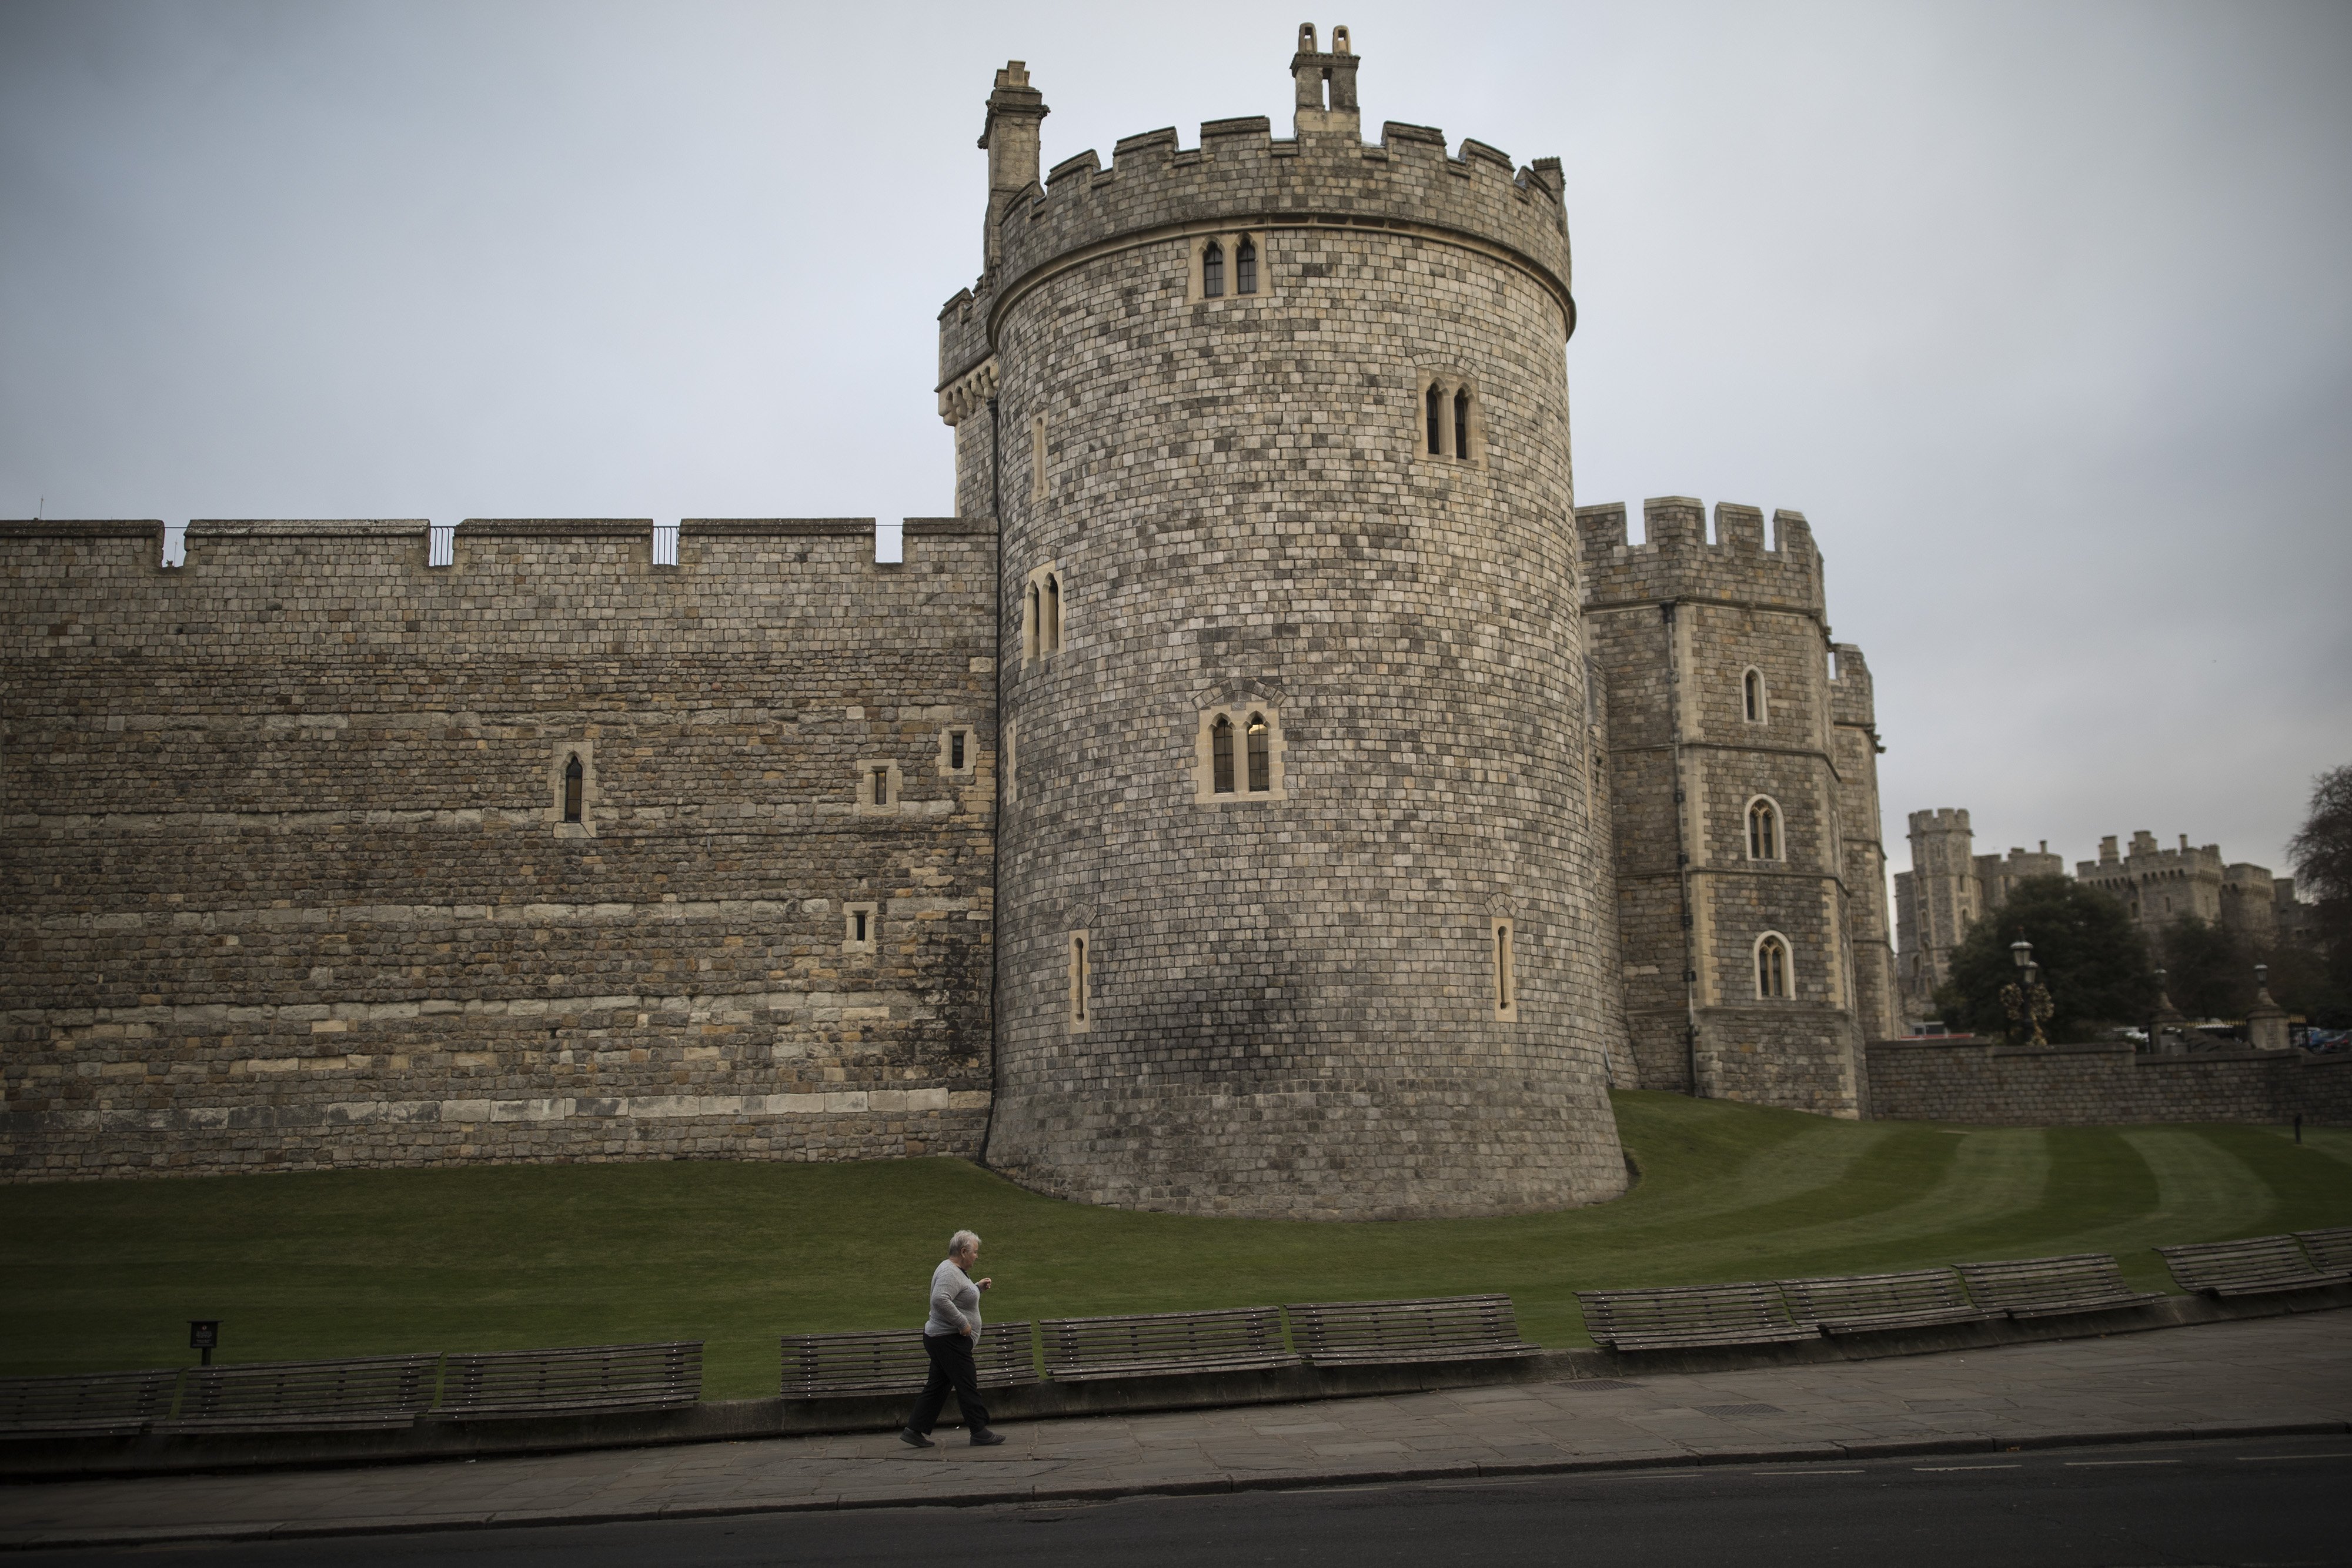 A view of Windsor Castle on November 29, 2017, in Windsor, England, where Prince Harry and Meghan Markle will marry in St George's Chapel in May 2018. | Source: Getty Images